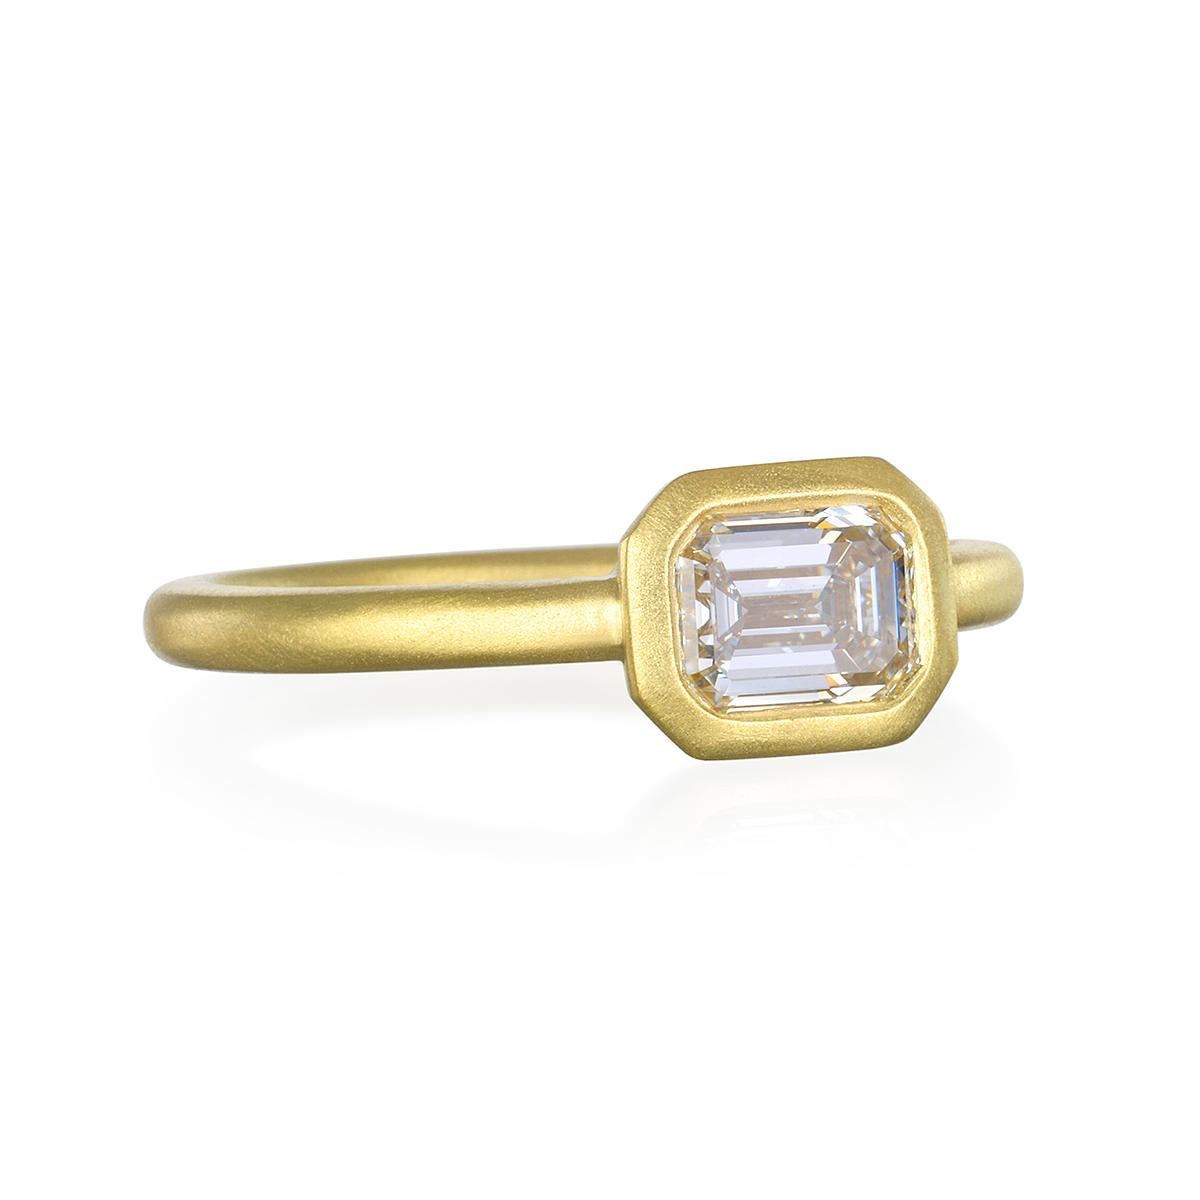 Faye Kim's Emerald Cut Diamond Ring is handcrafted in 18 karat gold. Set horizontally with a thin band, the stone is beautifully highlighted in a matte finished bezel for a clean, contemporary feel. Perfect for the modern bride or a right hand stack